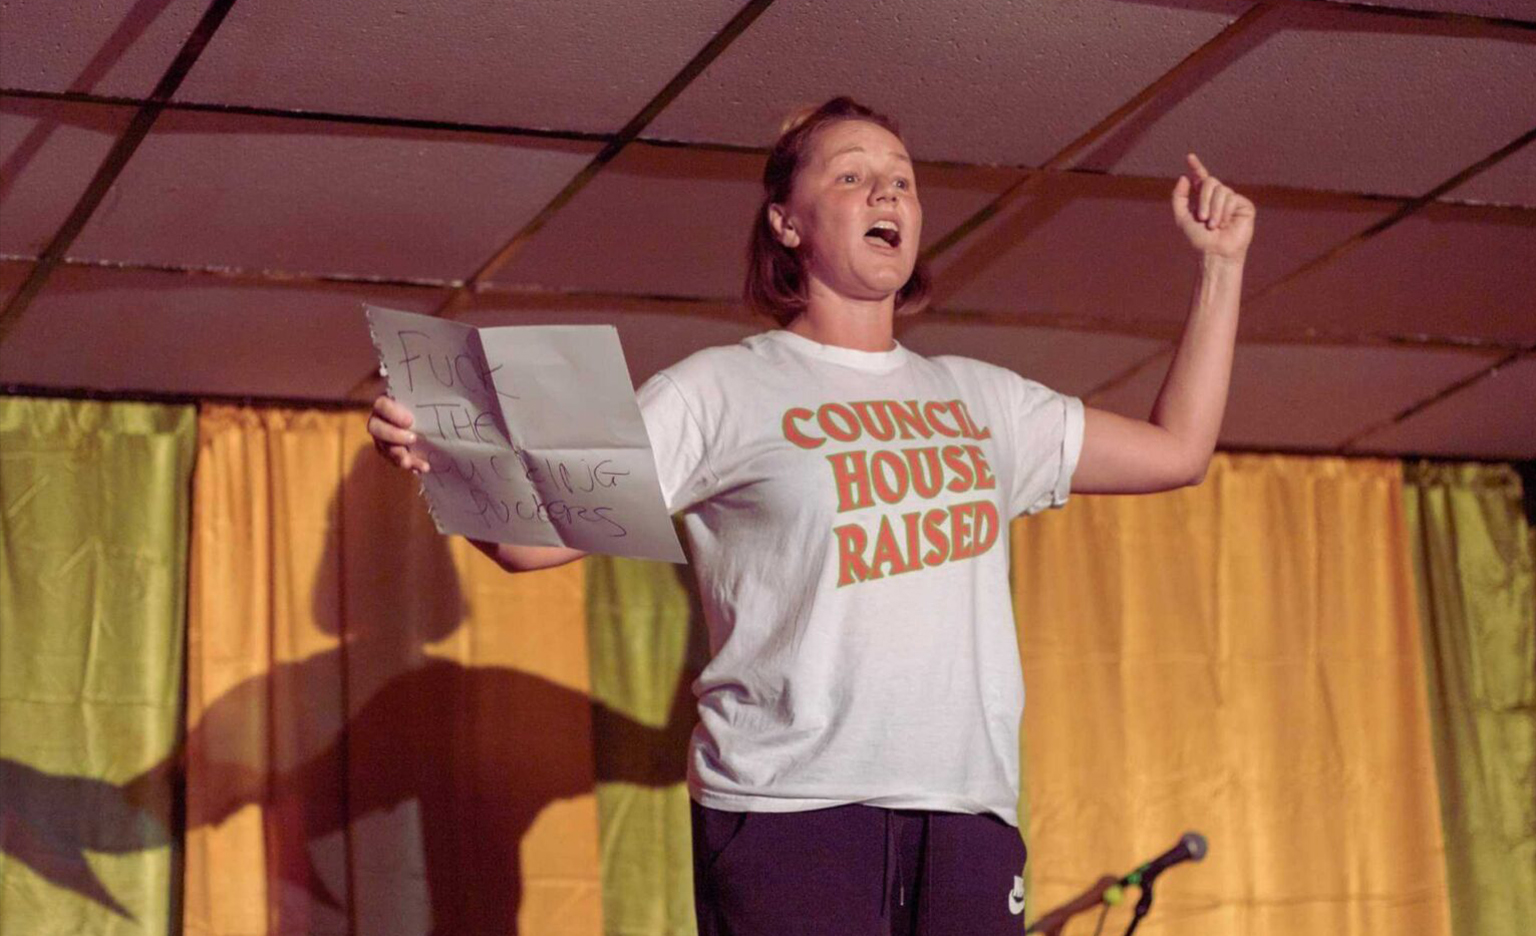 Jodie rehearsing. She is standing in a low ceiling room, yellow and pistachio green curtains behind her. She wears a white t-shirt with all caps orange letters on it that read: "Council house raised". She holds a white sheet of paper with one hand, on which can be seen the words: "FUCK THE FUCKING FUCKERS". Her other hand is raised up in the air in protest and her faces suggests shouting.